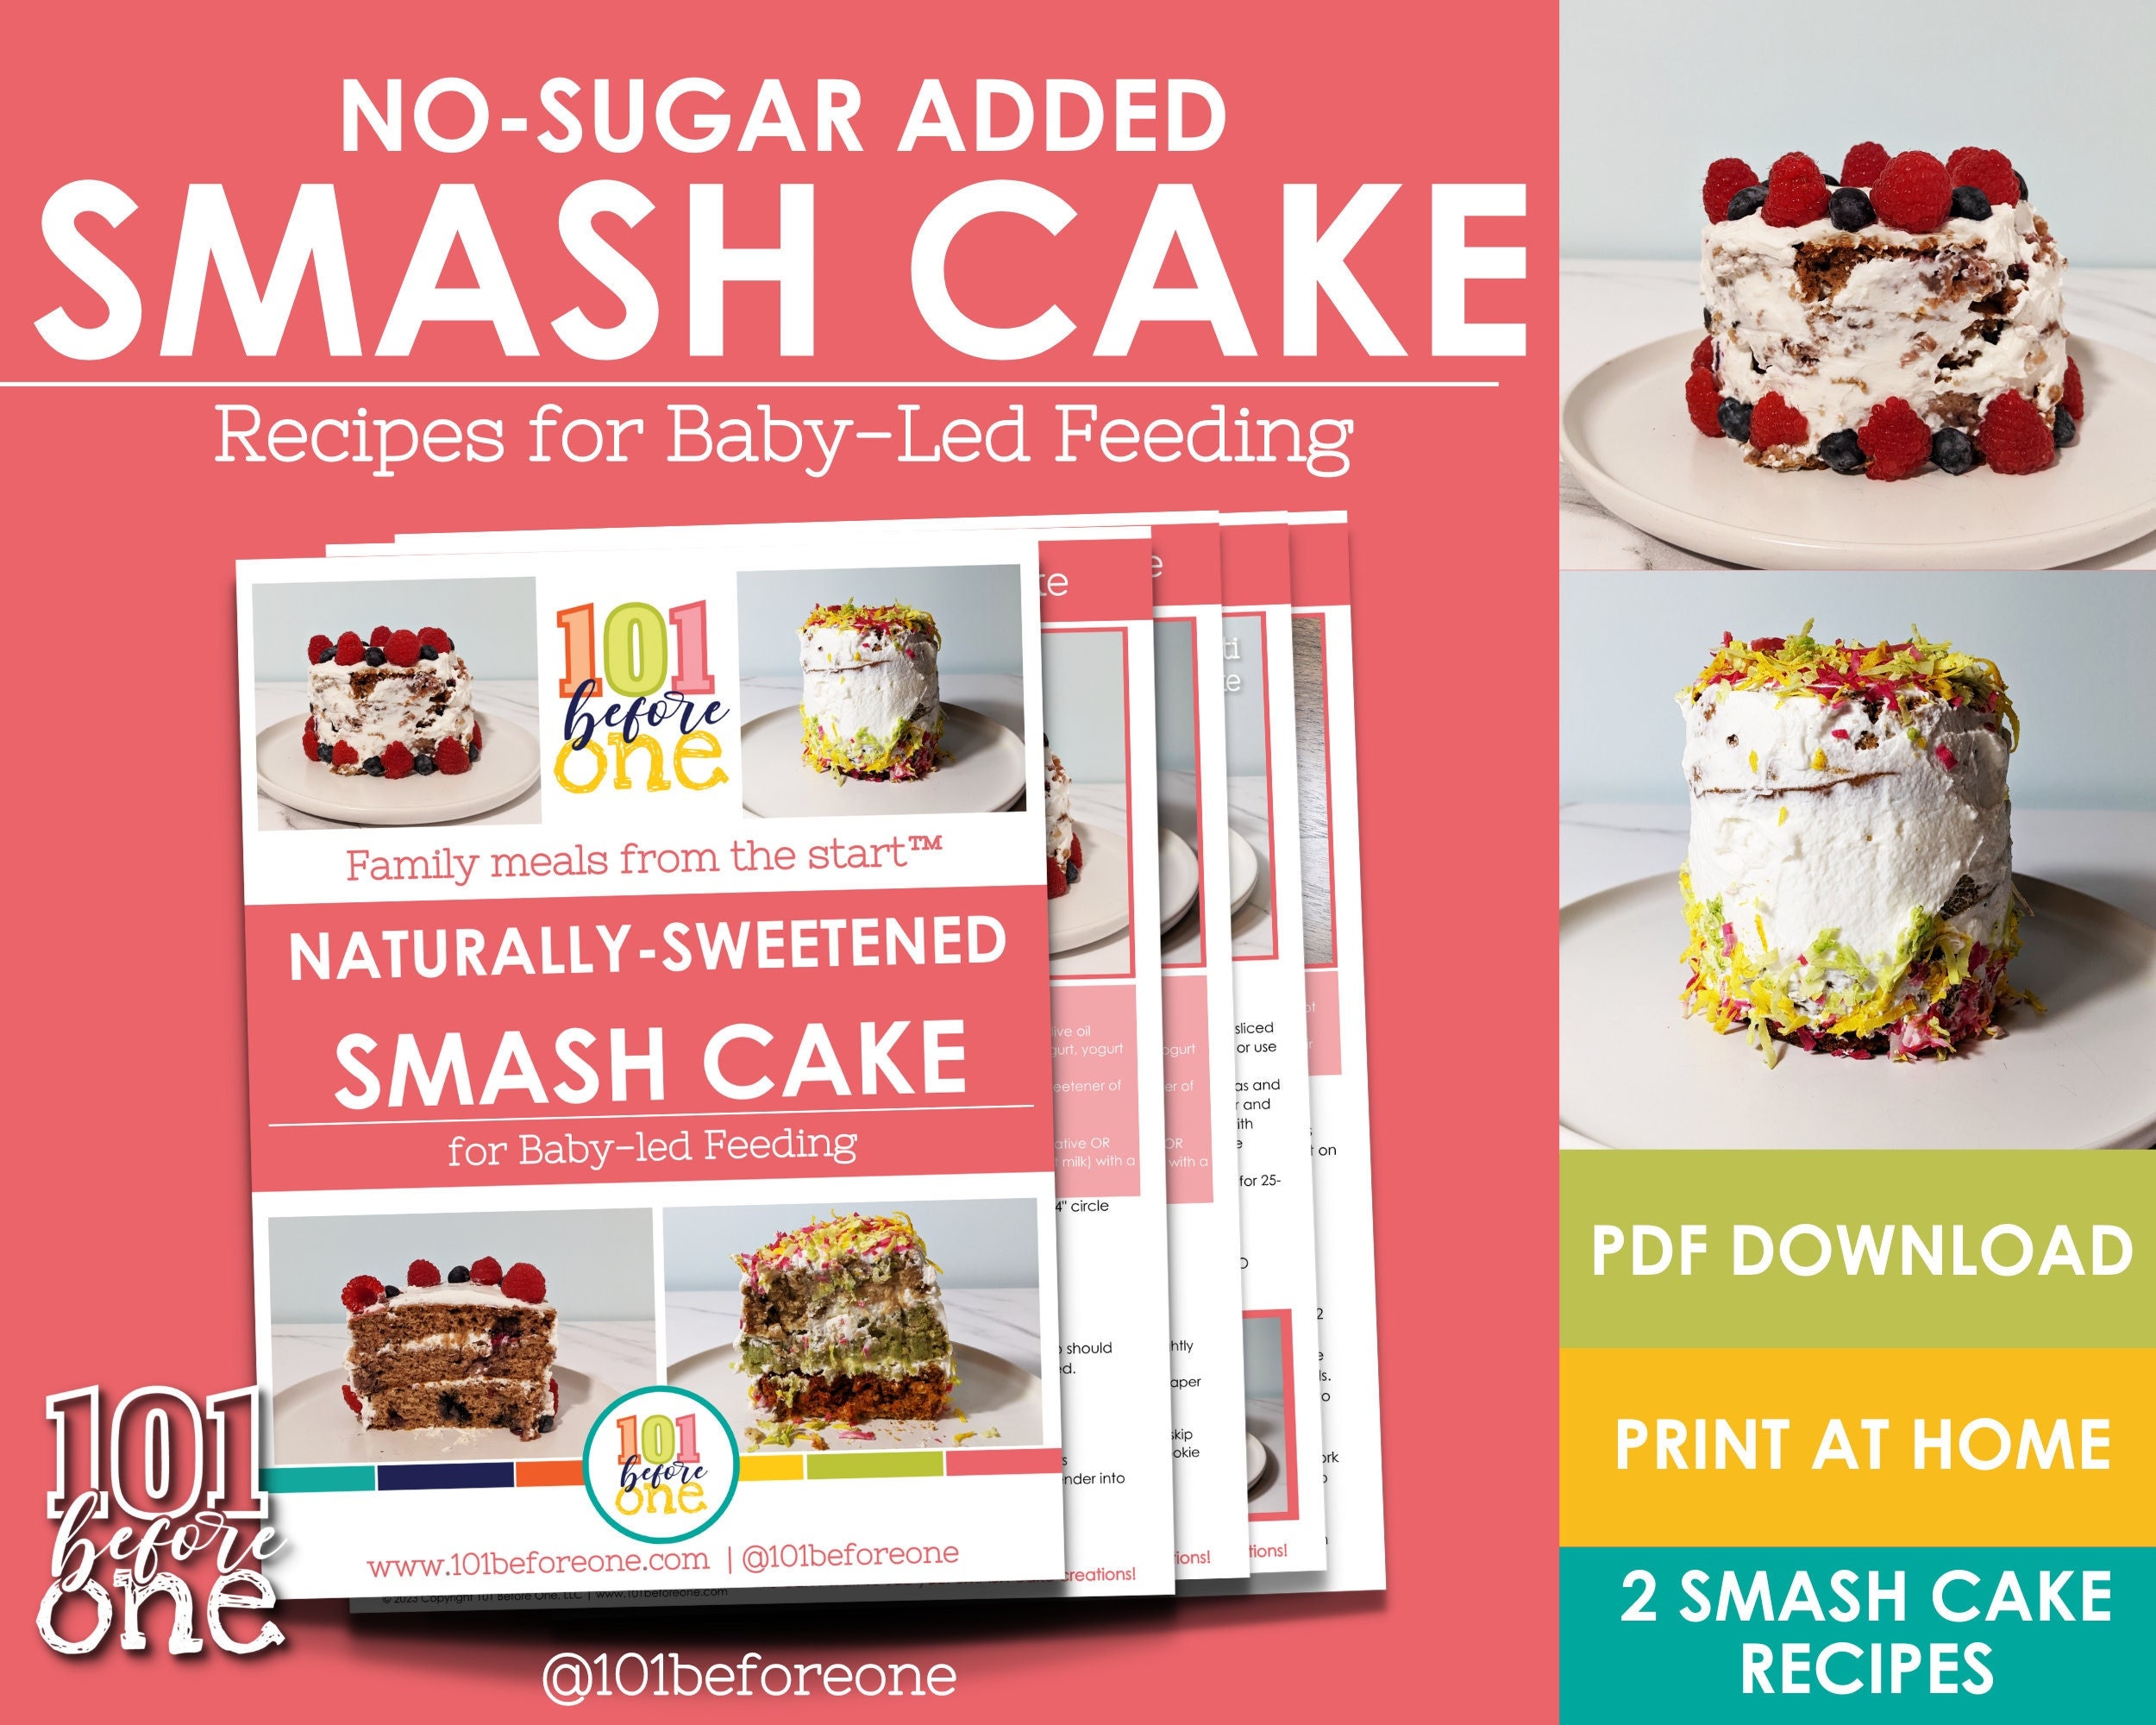 Smash Cake Recipe for Baby's 1st Birthday from @101beforeone | No Added  Sugar, Naturally Sweetened with Banana